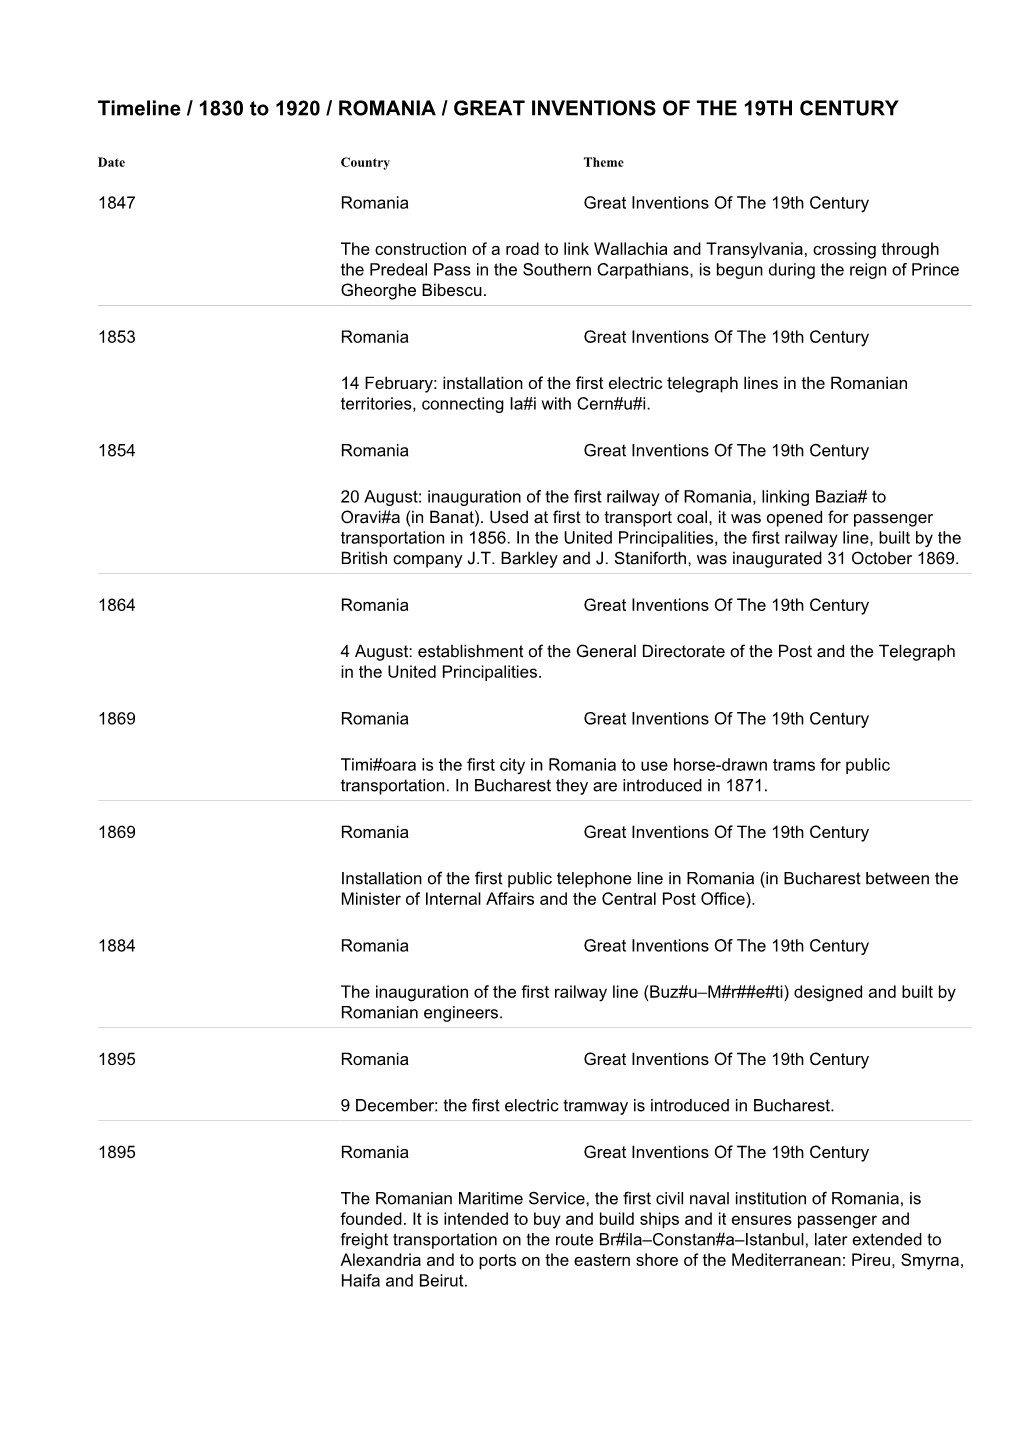 Timeline / 1830 to 1920 / ROMANIA / GREAT INVENTIONS of the 19TH CENTURY